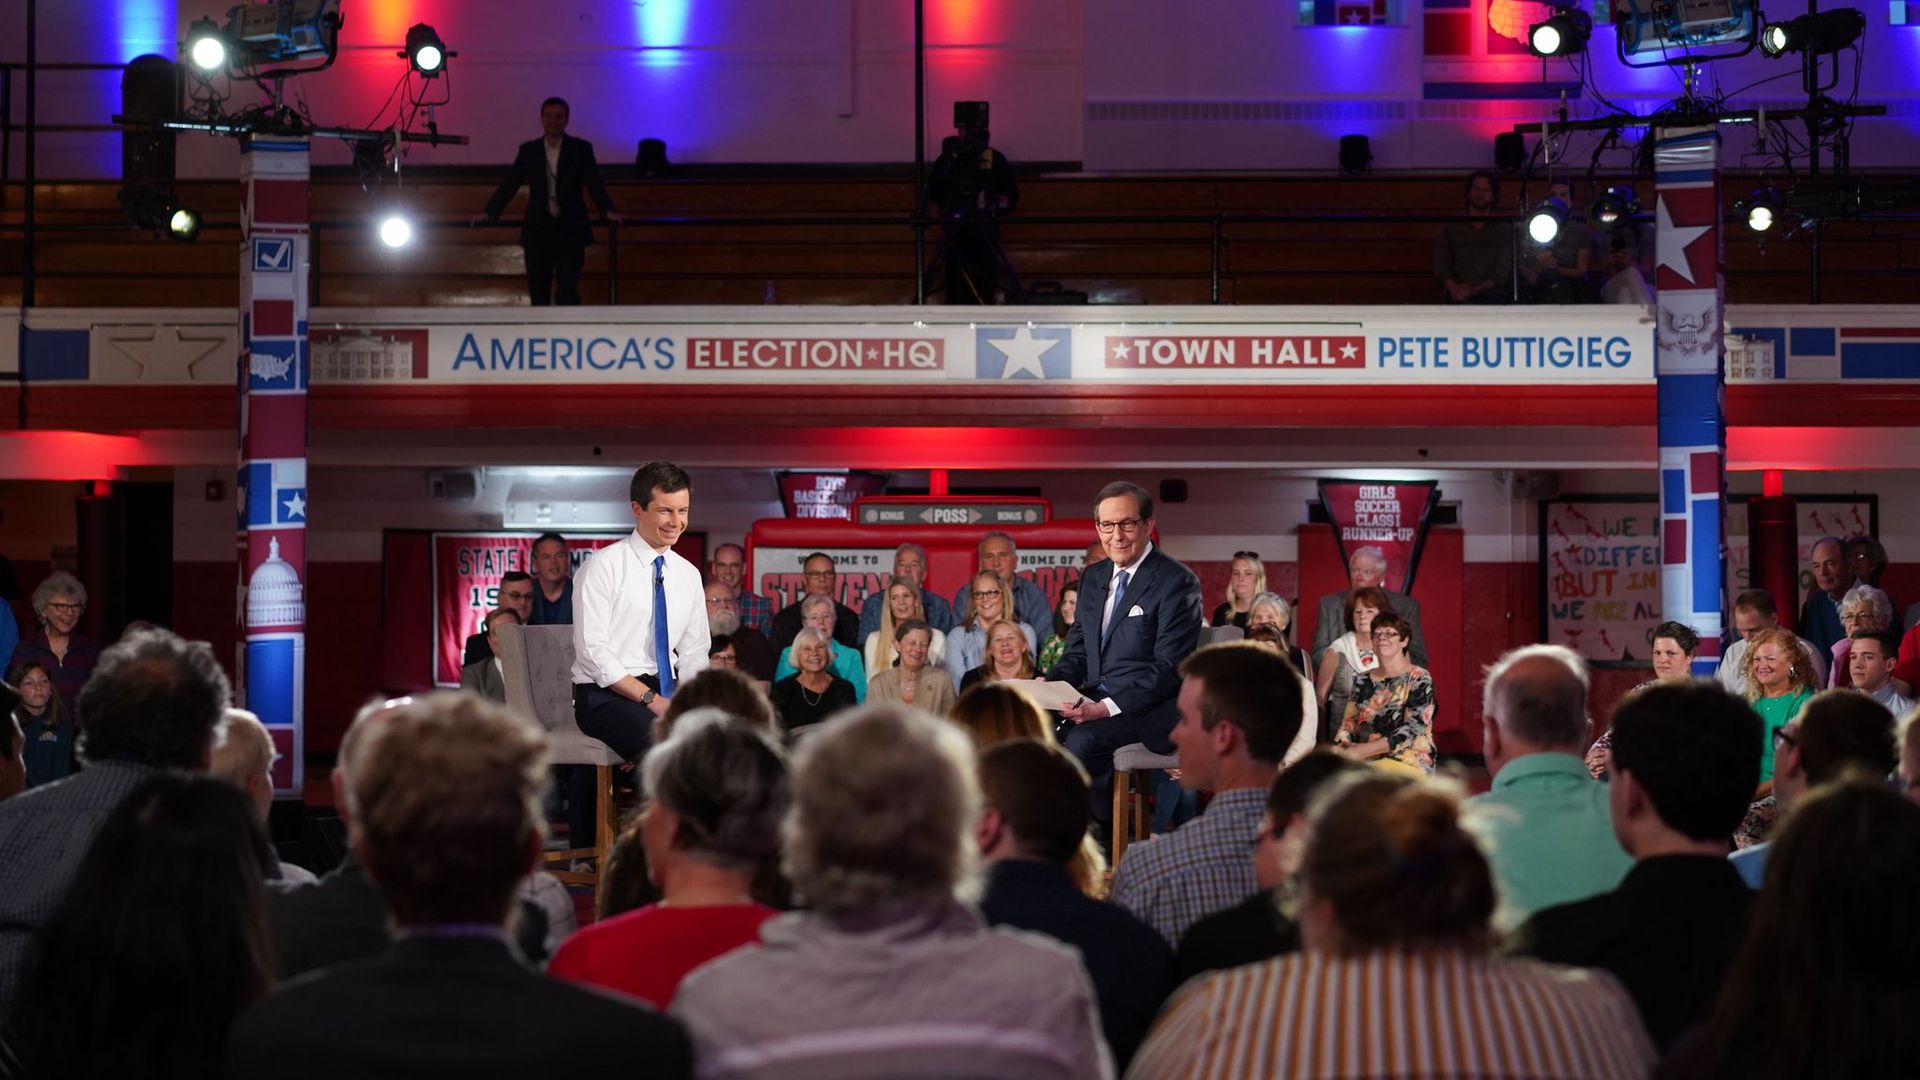 Chris Wallace holing a town hall with Pete Buttigieg in May